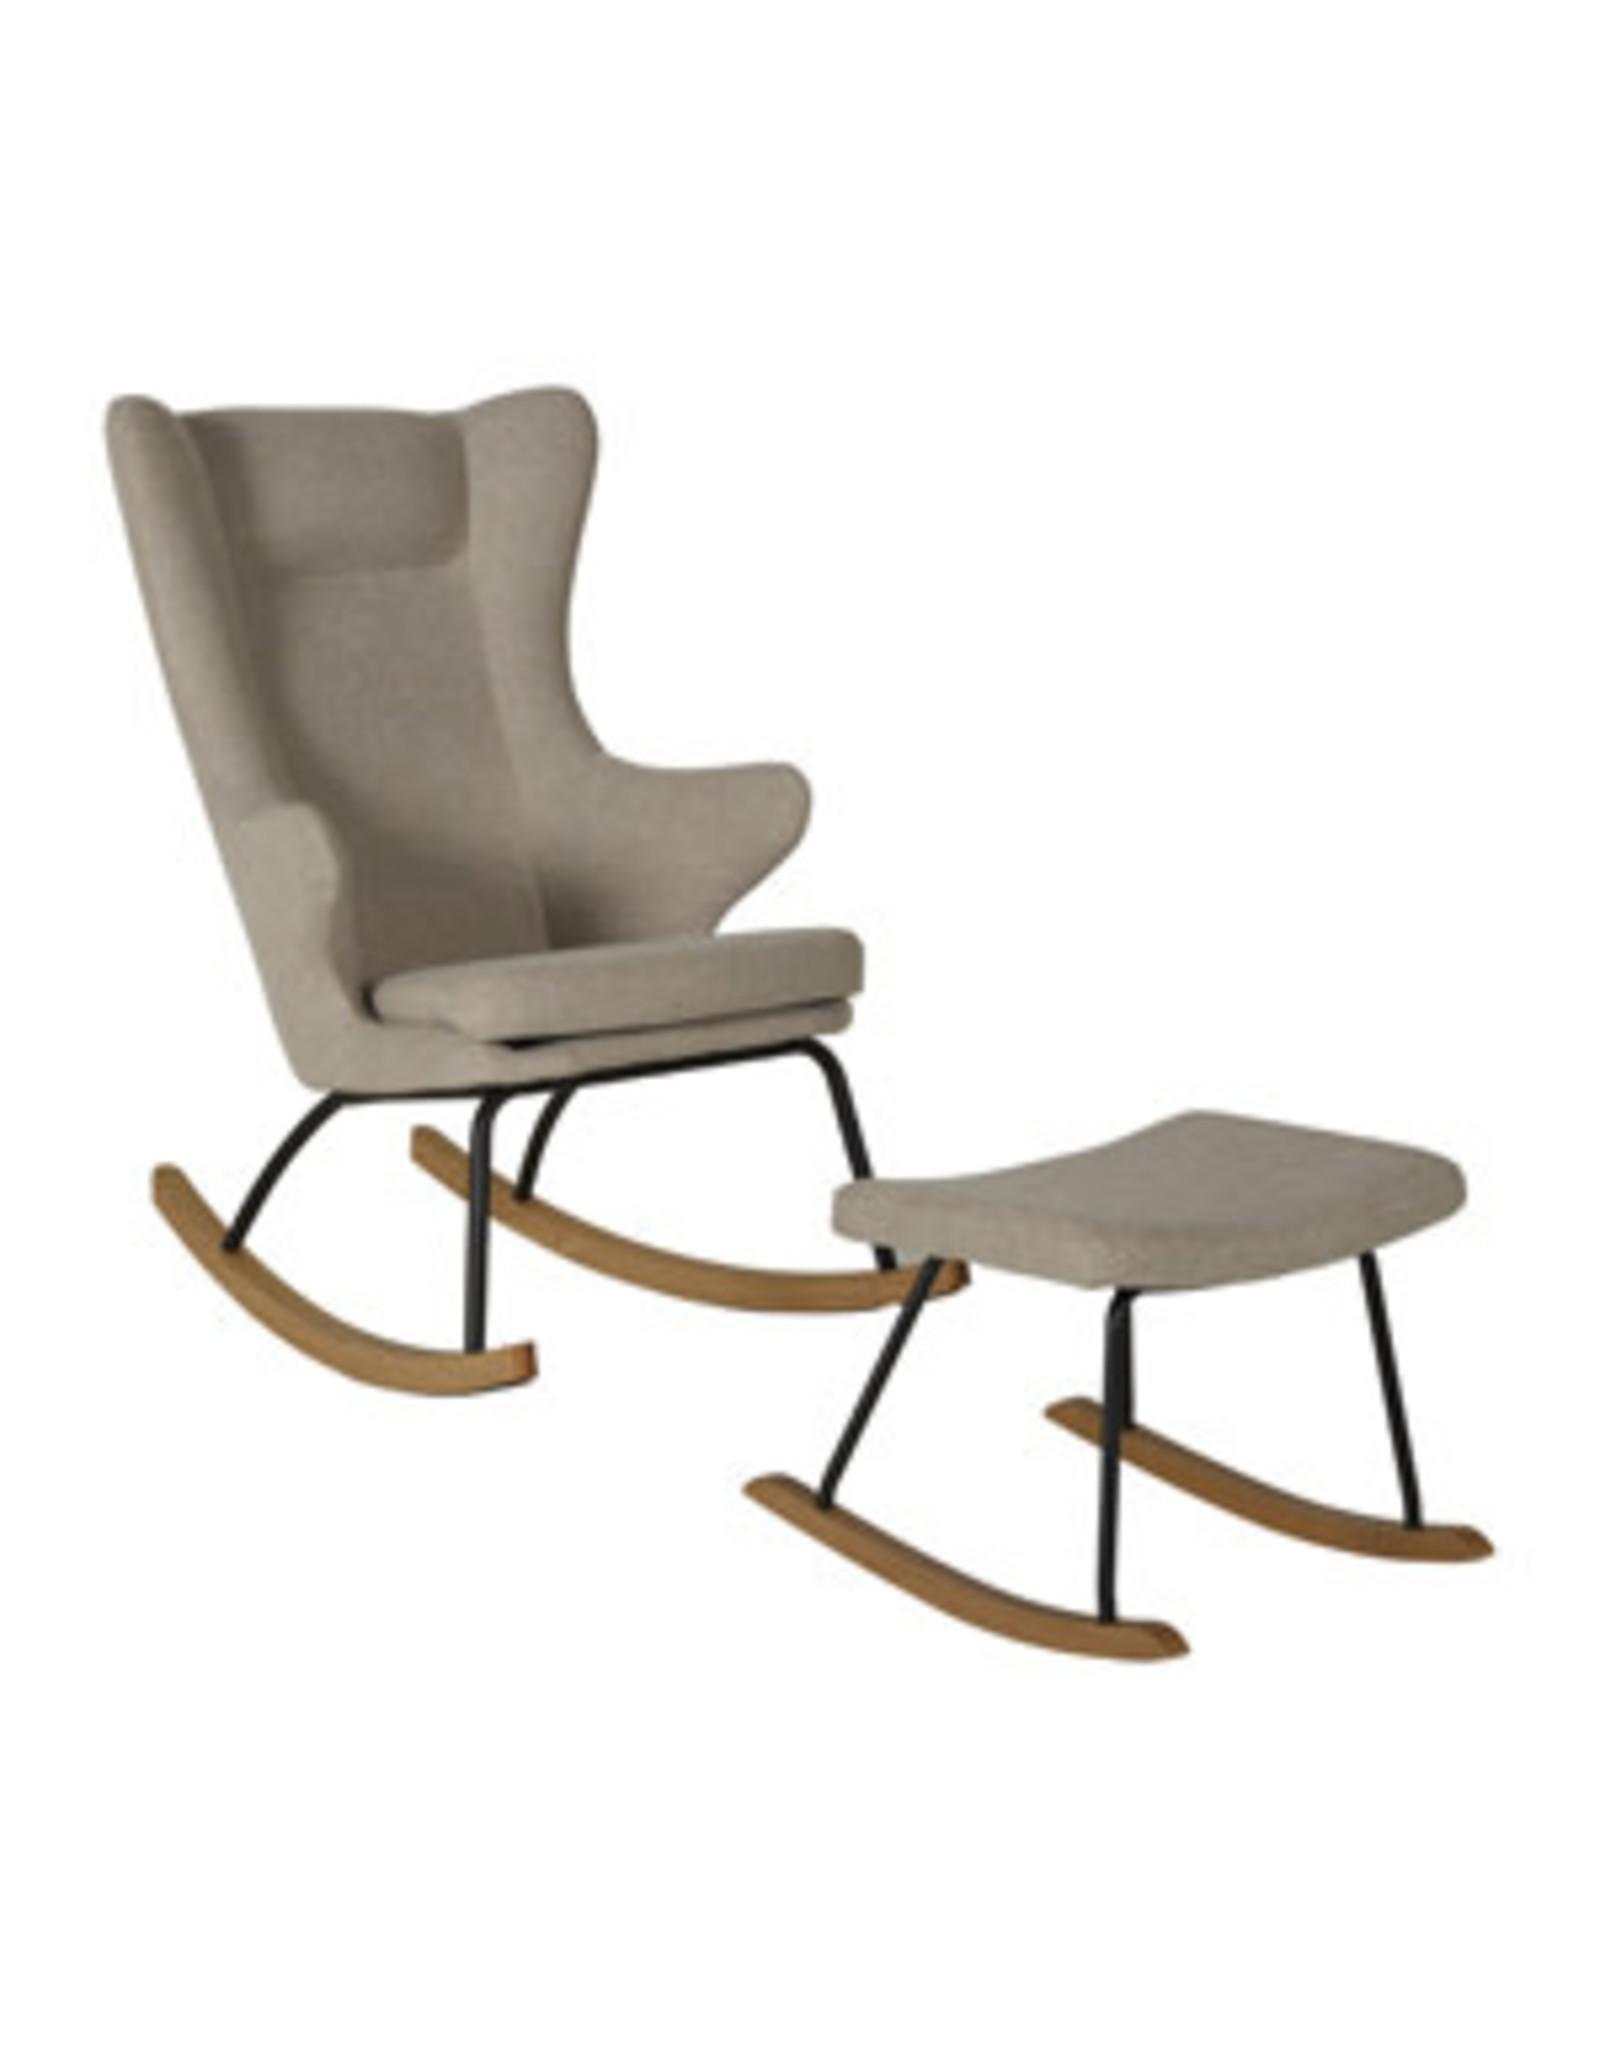 Quax - Rocking Adult Chair De Luxe - Clay